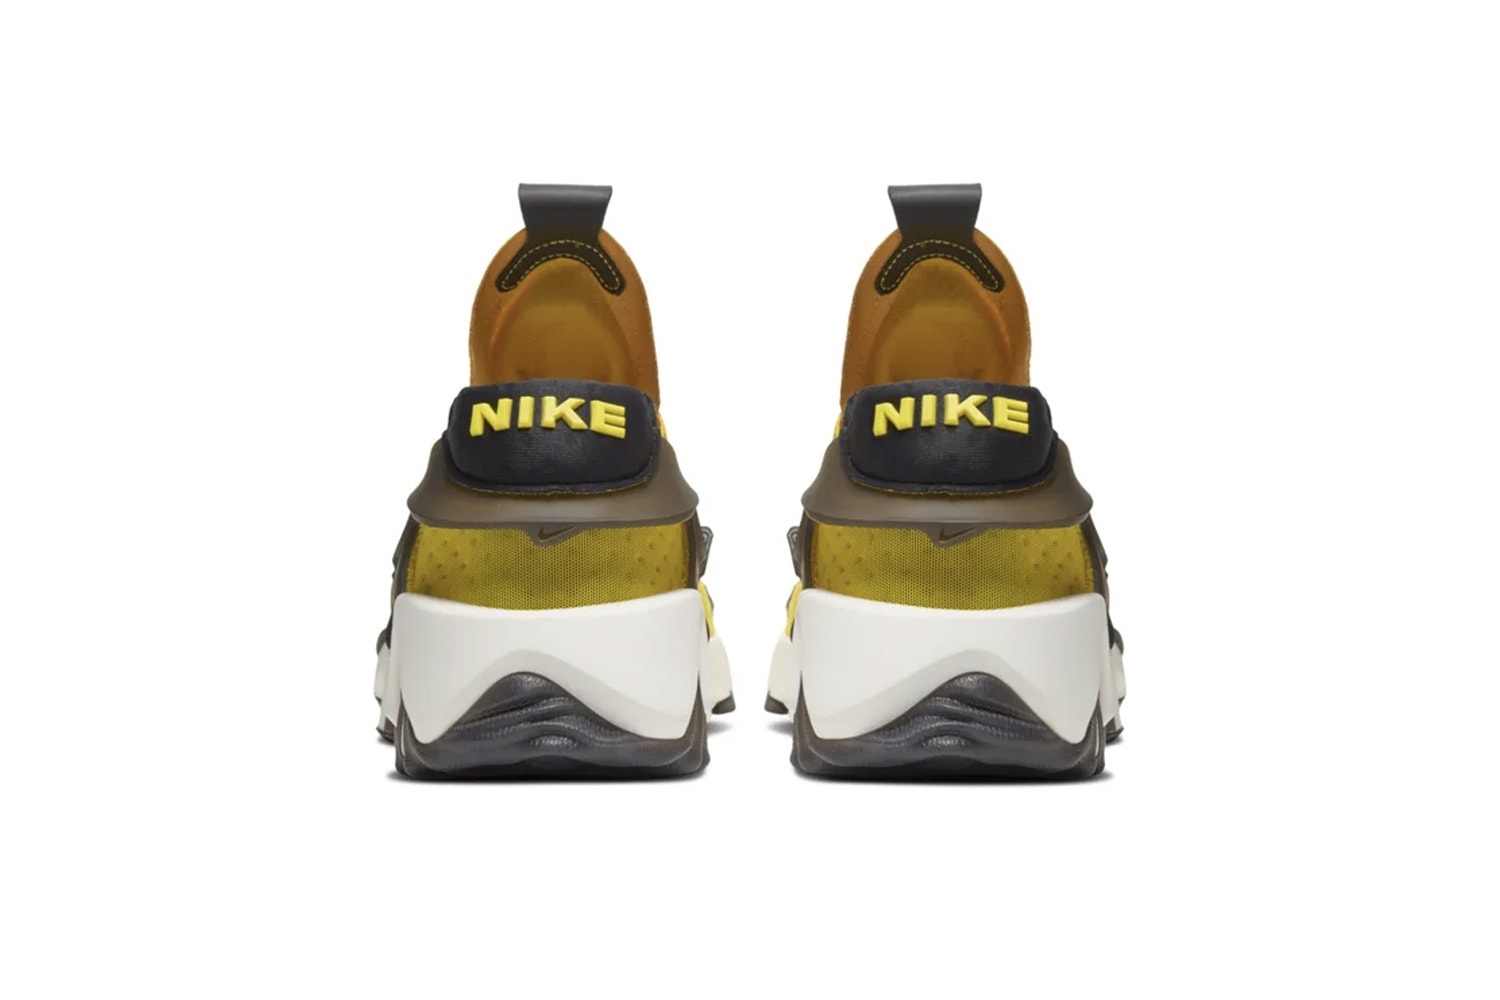 Nike Adapt Huarache Air Huarache Official Images & Release Info "White/Black" "Opti-Yellow" power lacing footwear sneakers release app back to the future shoes 